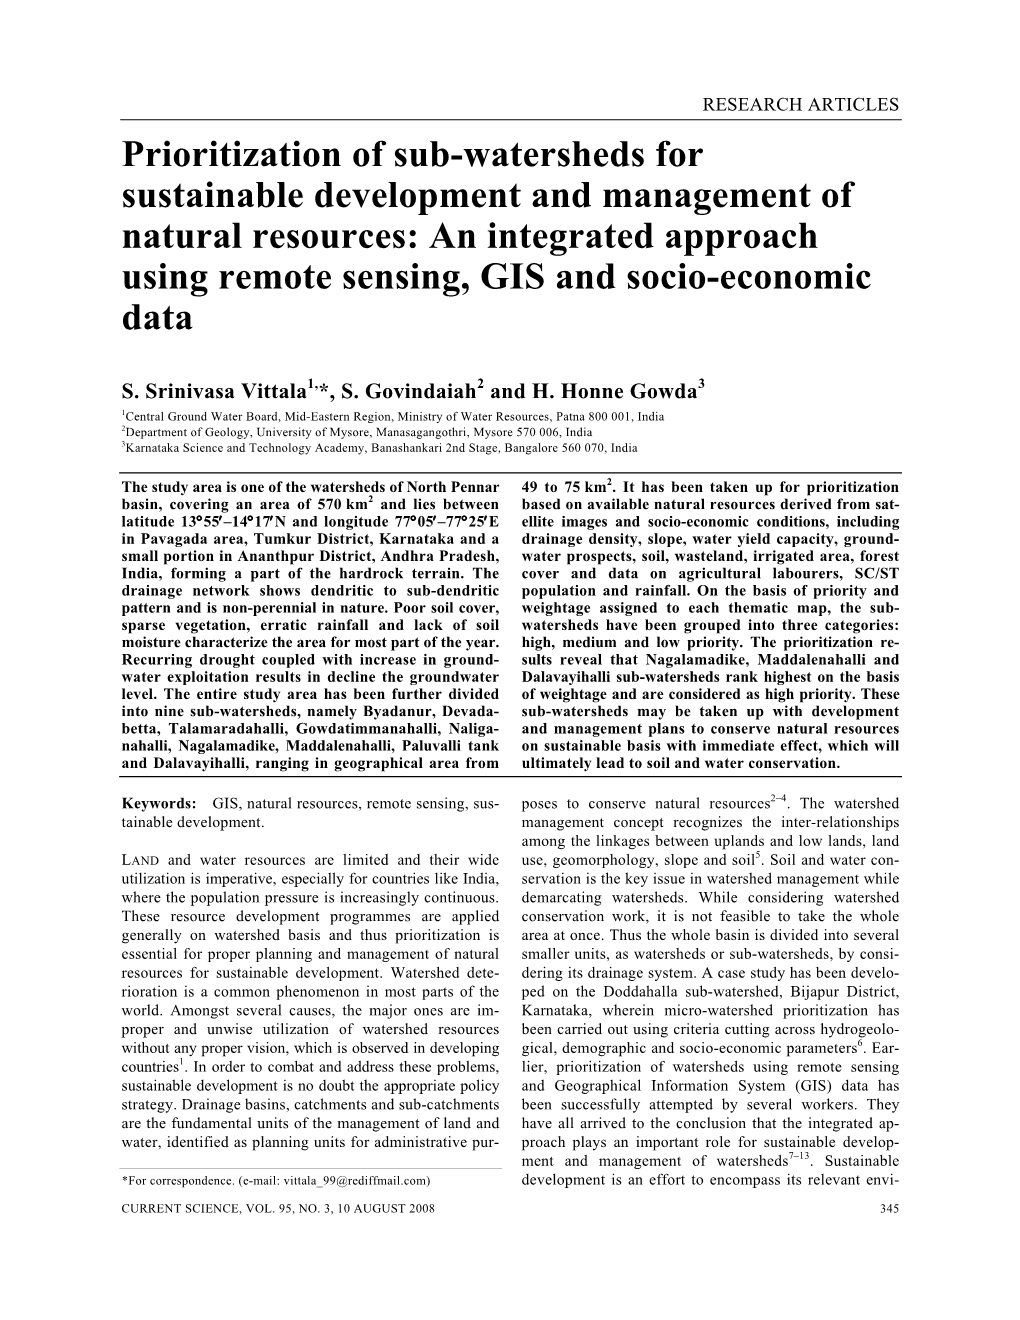 Prioritization of Sub-Watersheds for Sustainable Development and Management of Natural Resources